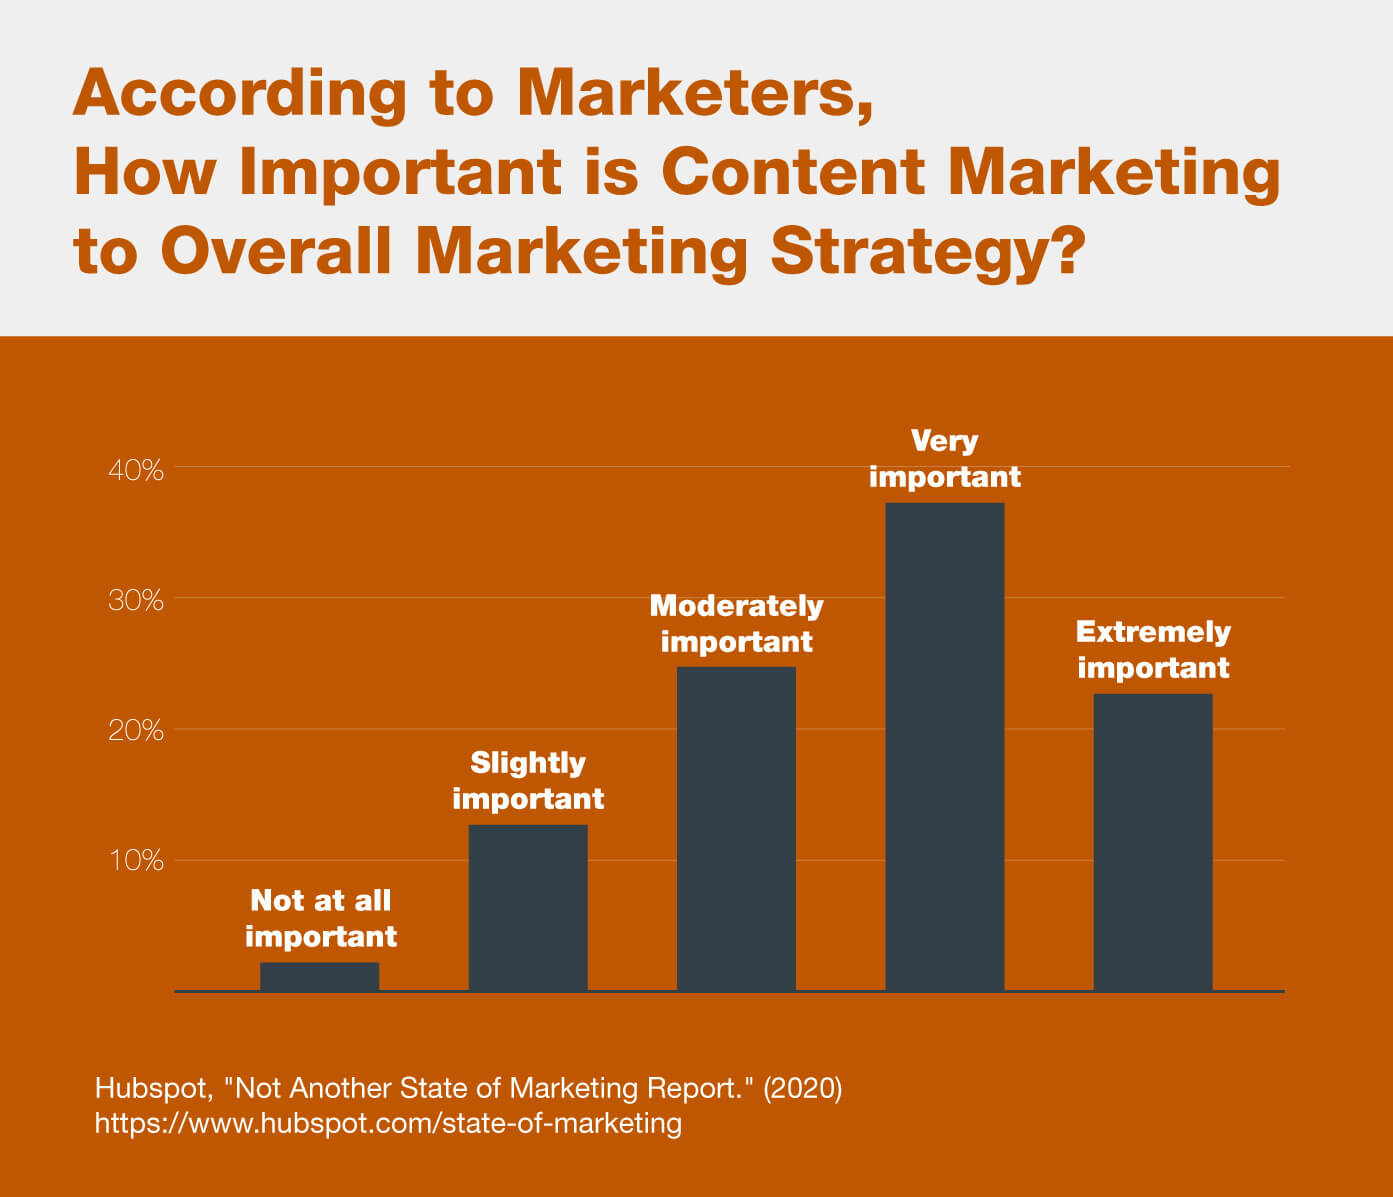 A graph showing how important content marketing is, according to marketers